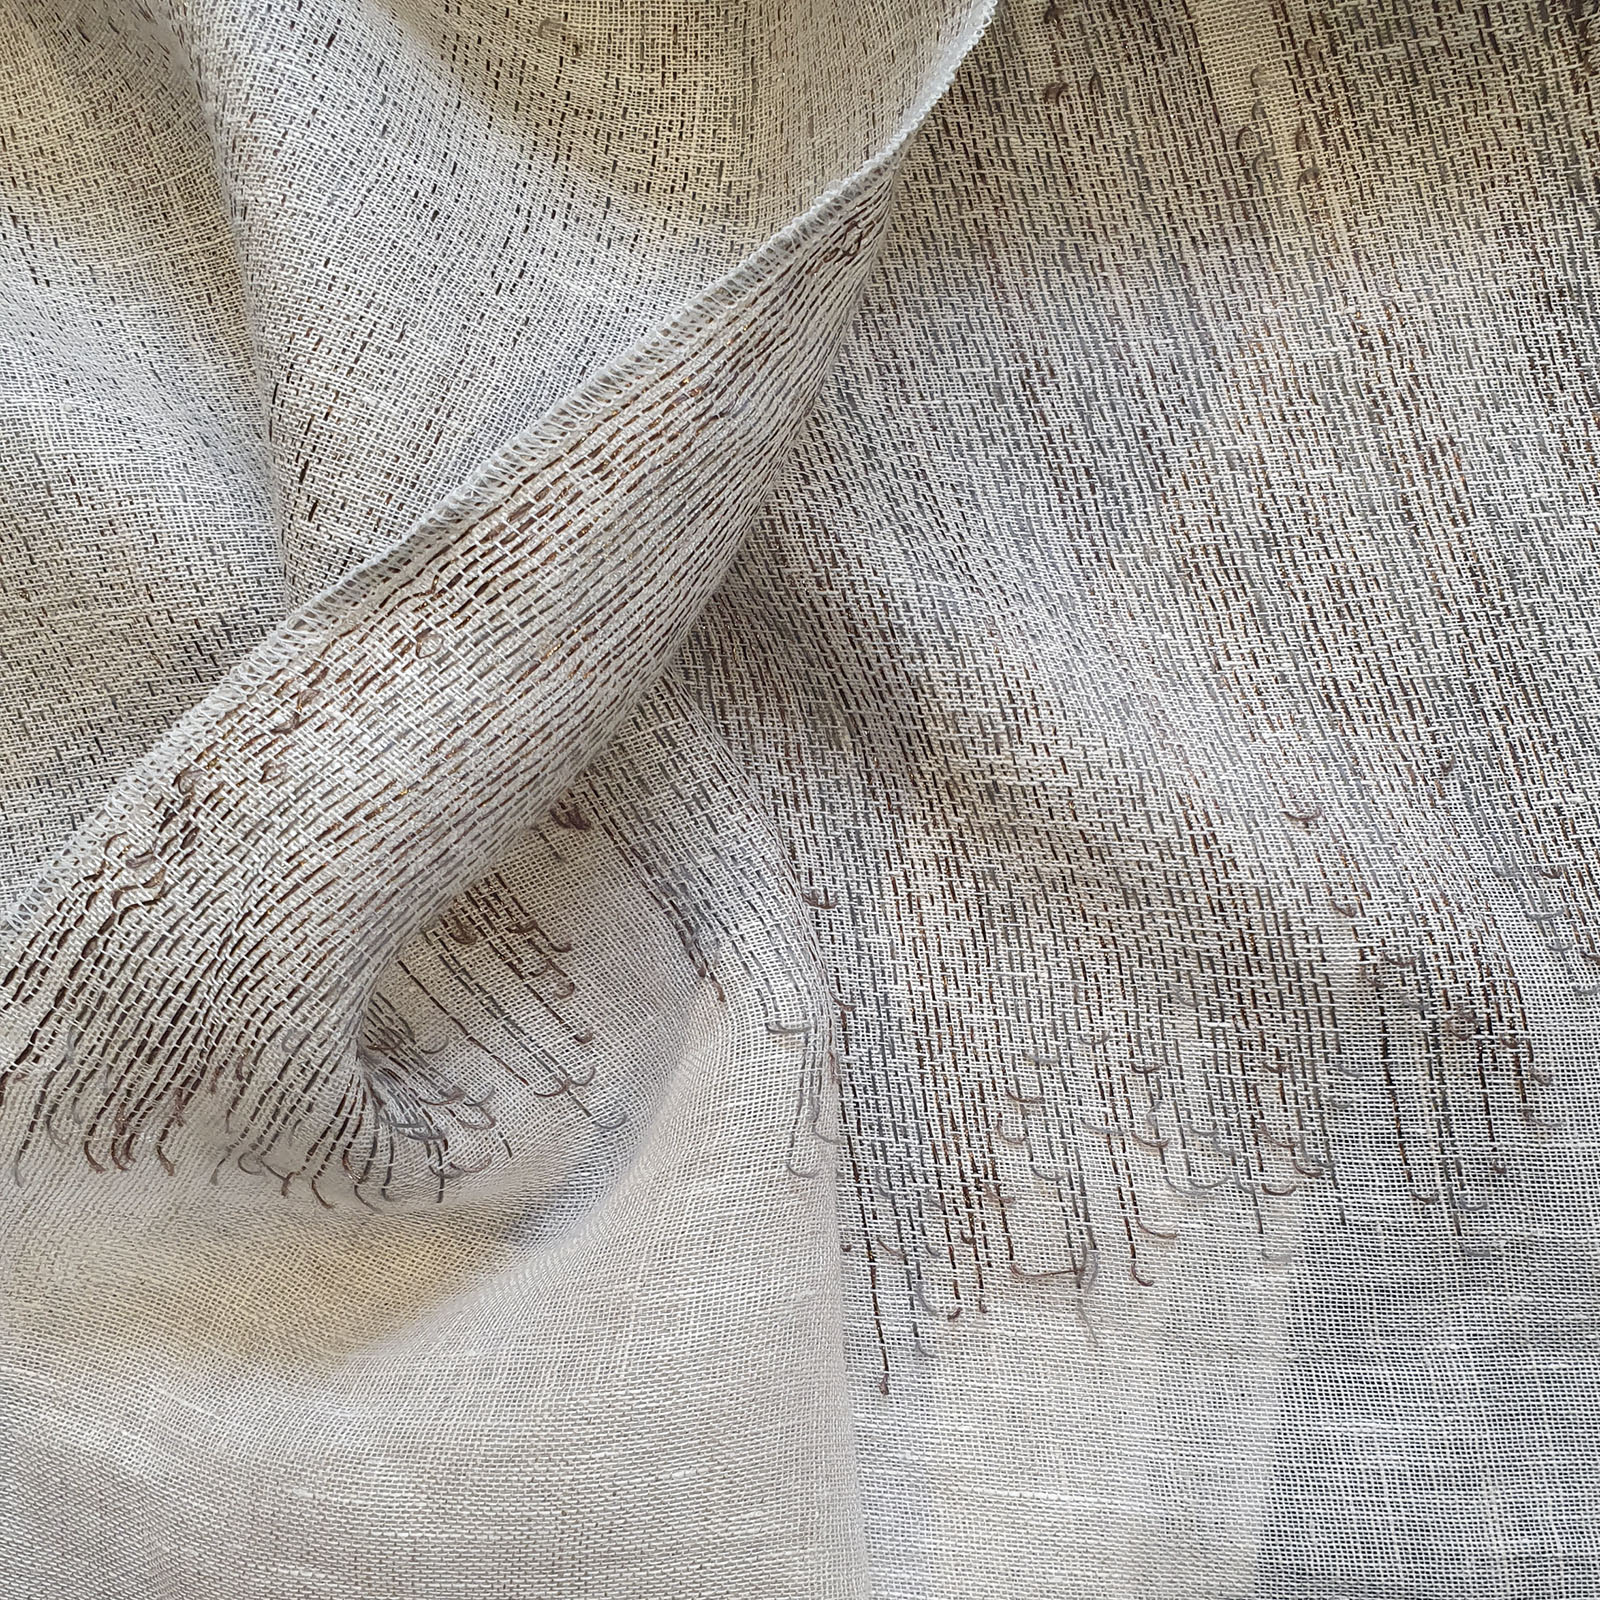 LI391536 WHIDE CM 330 90%LIN 10%PL
Jacquard net weaving   100% linen soft finishing.<br /> 100% Made in Italy fabric. Style modern, rustic and trendy with fancy, plain, jacquard structures, small drawings and stripes decorations.

 Treatments: antibacterial and soft standard. Type of workings: jacquard. 